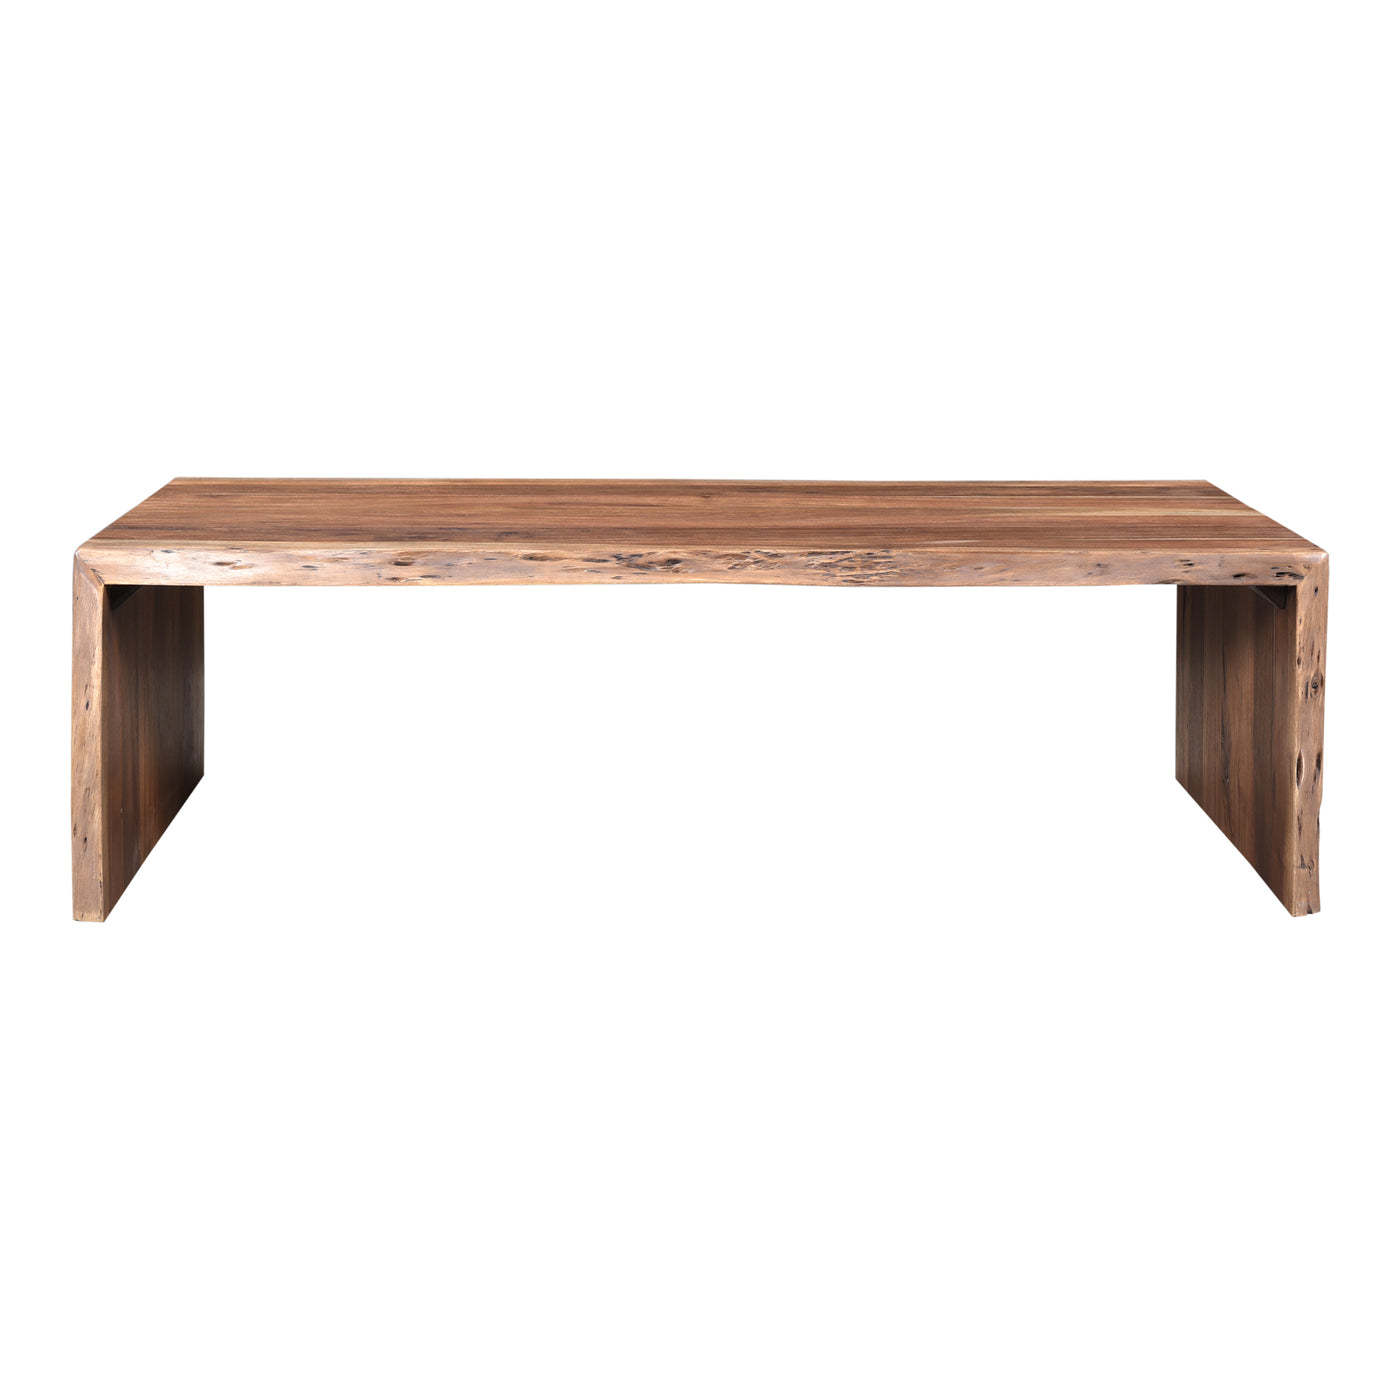 The Tyrell coffee table is pure rustic simplicity. Crafted from solid acacia wood, the natural finish and live edge are co...